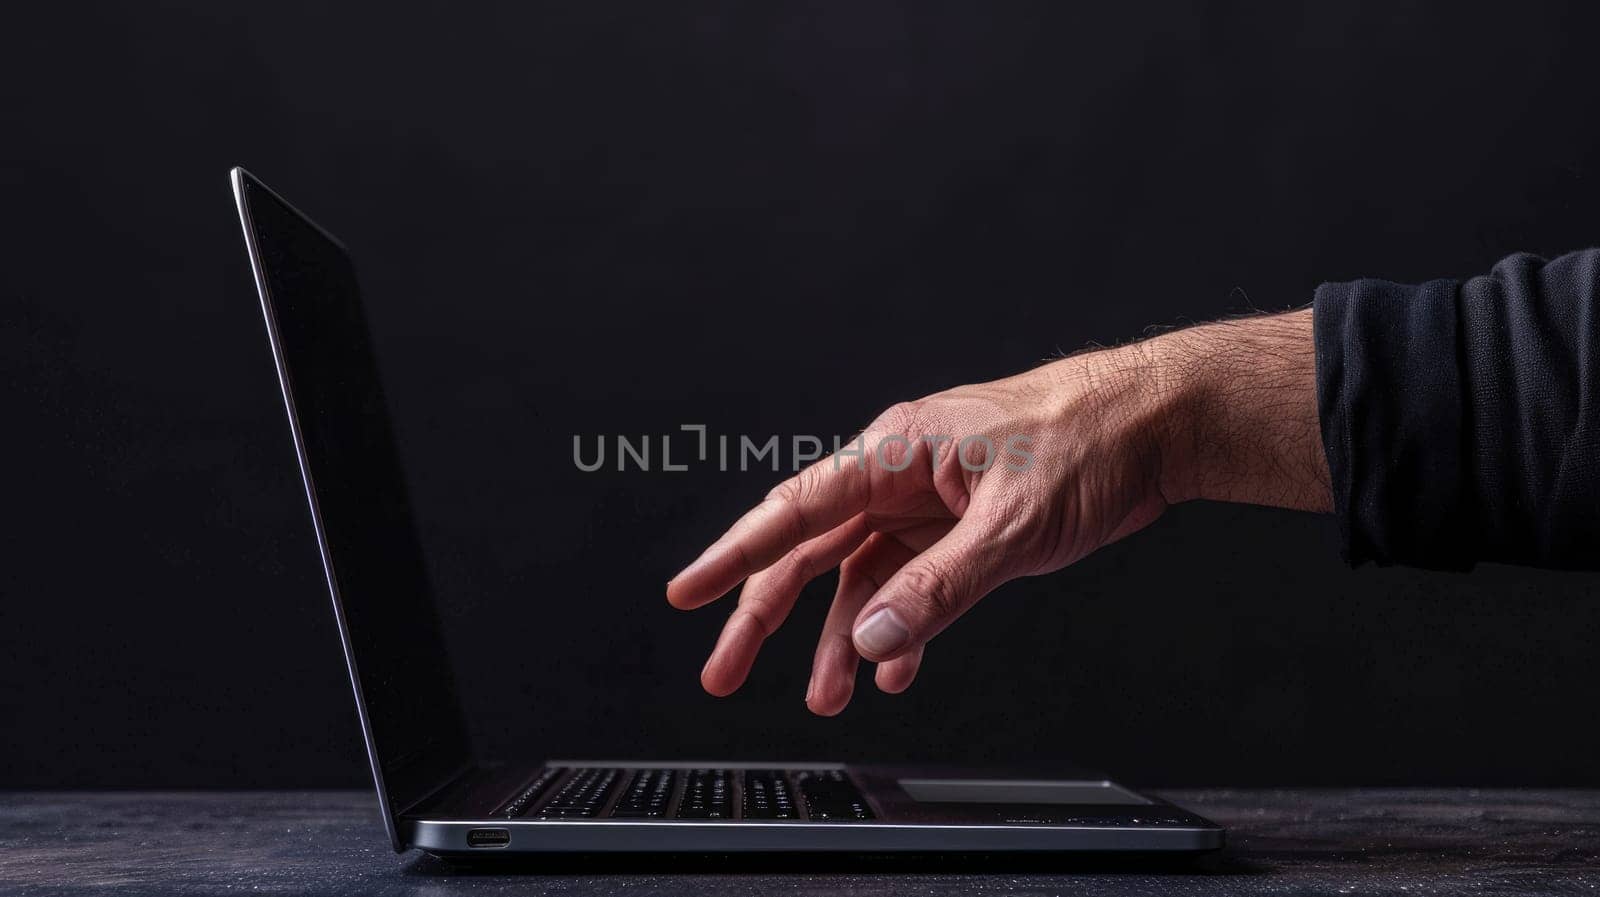 A hand reaching out to a laptop, Connection through technology.